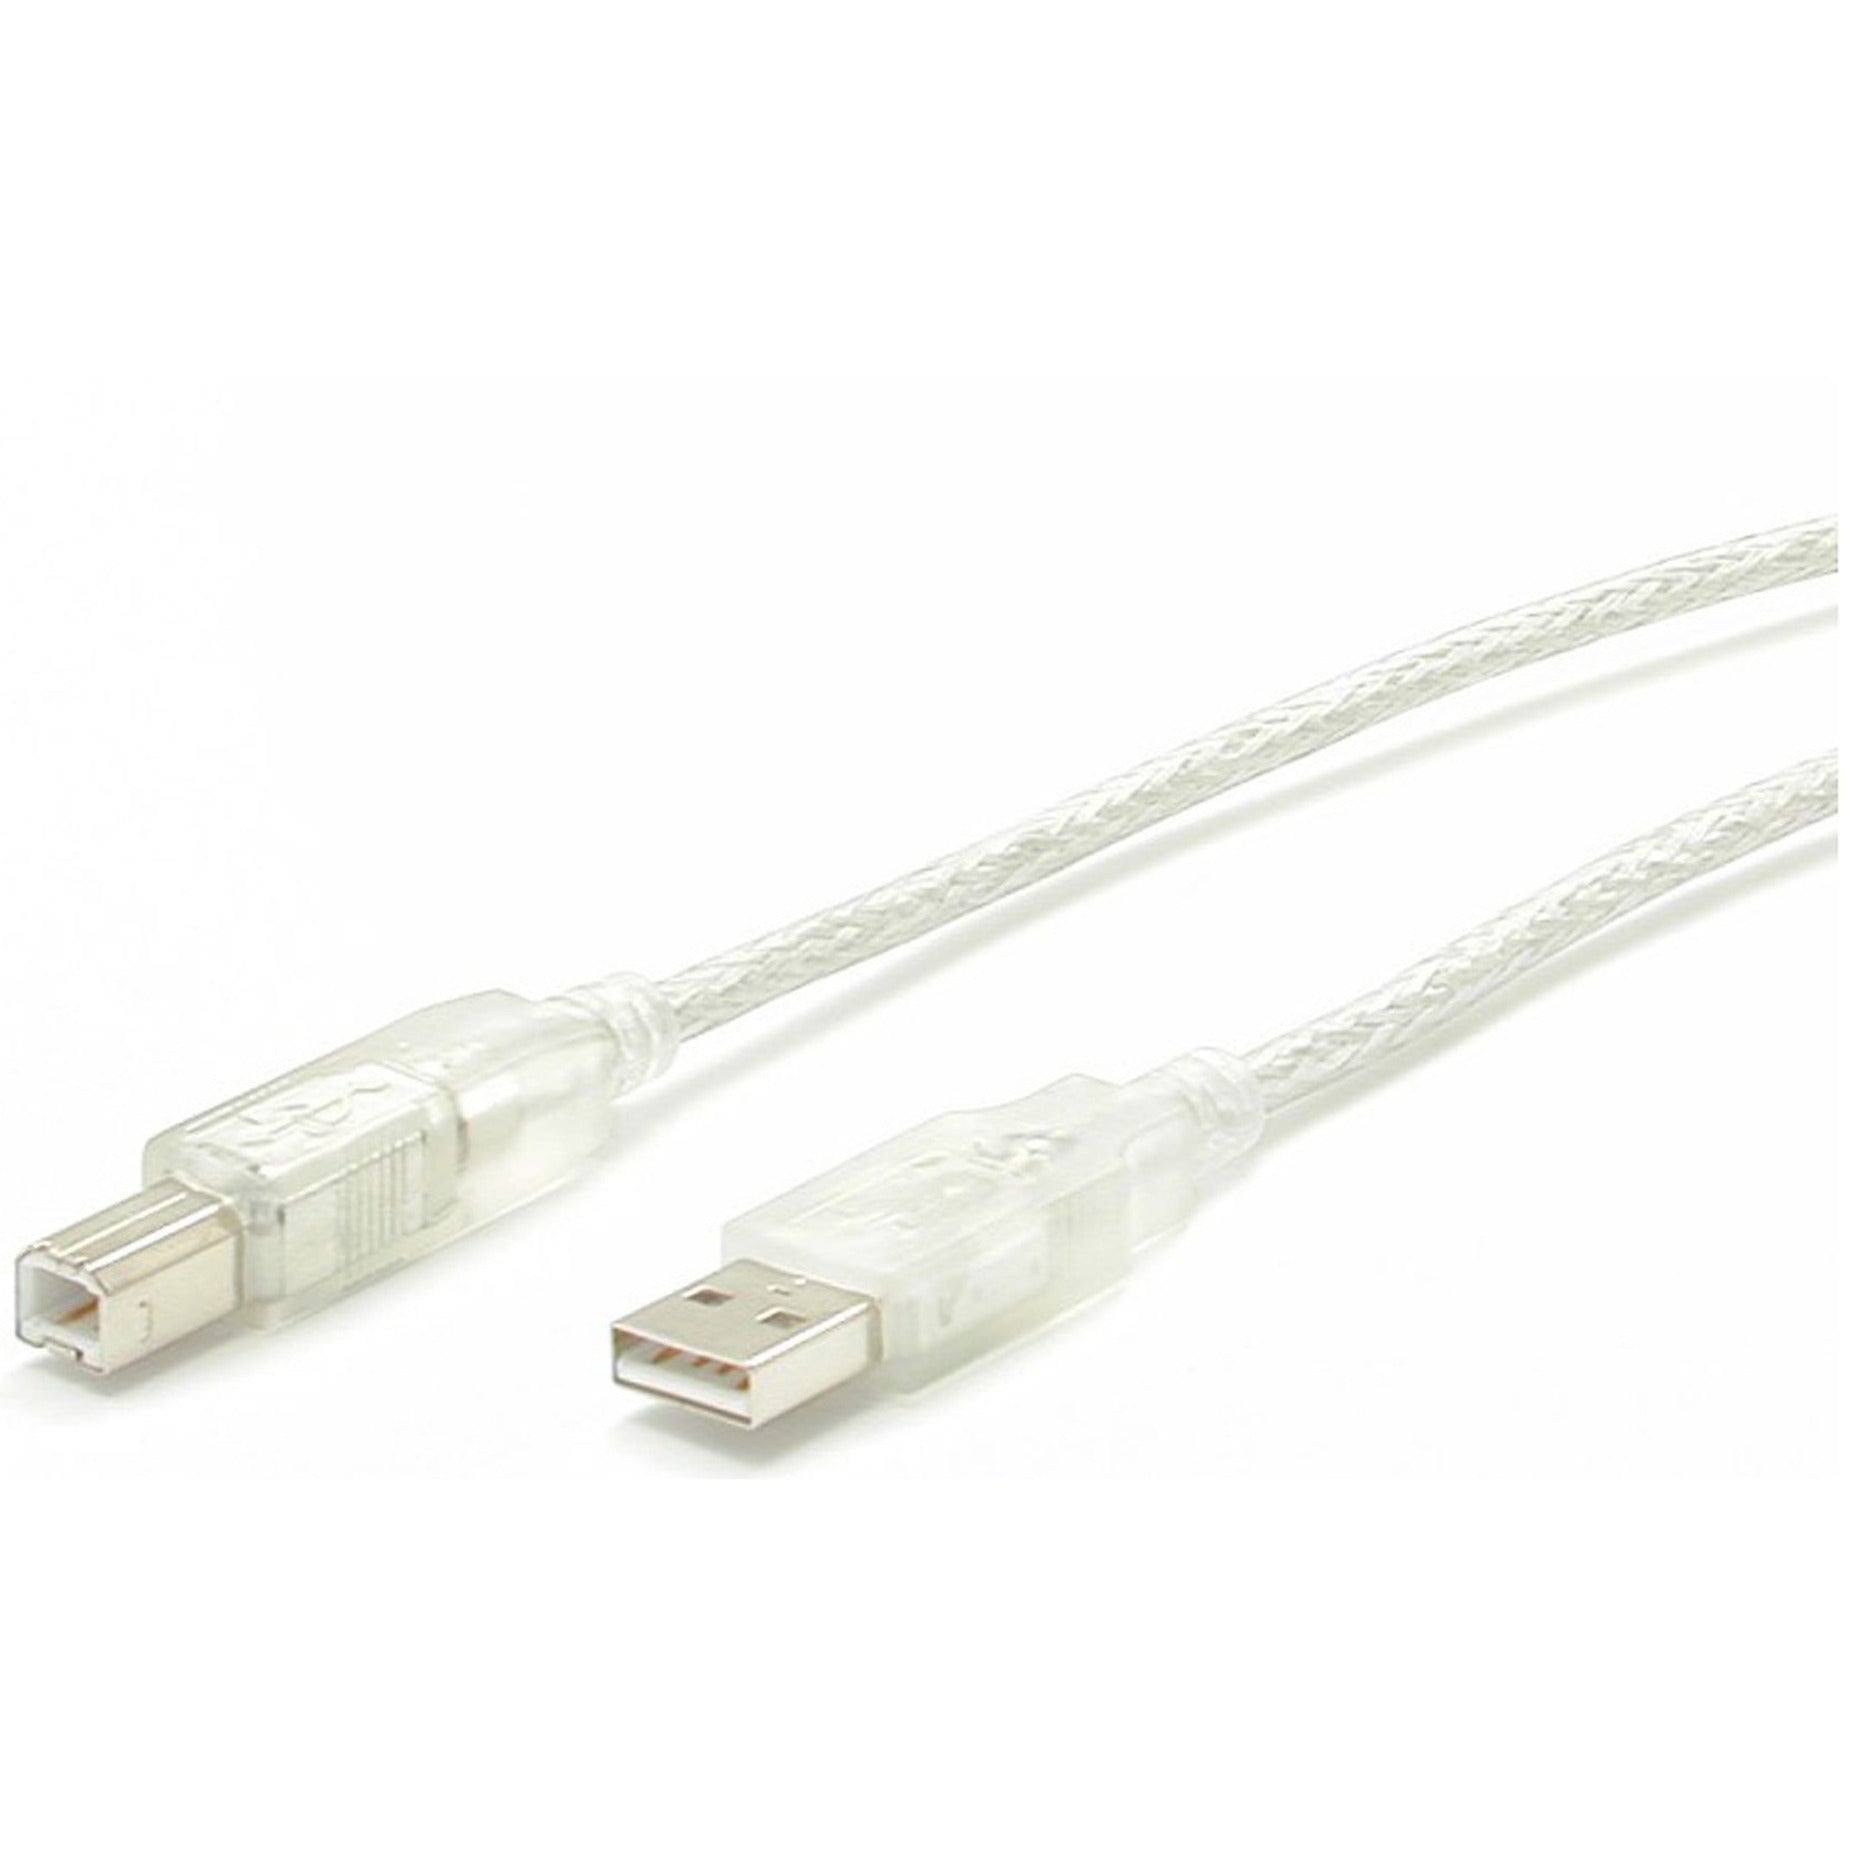 StarTech.com USBFAB10T Transparent USB 2.0 Cable, 10 ft, Data Transfer Cable